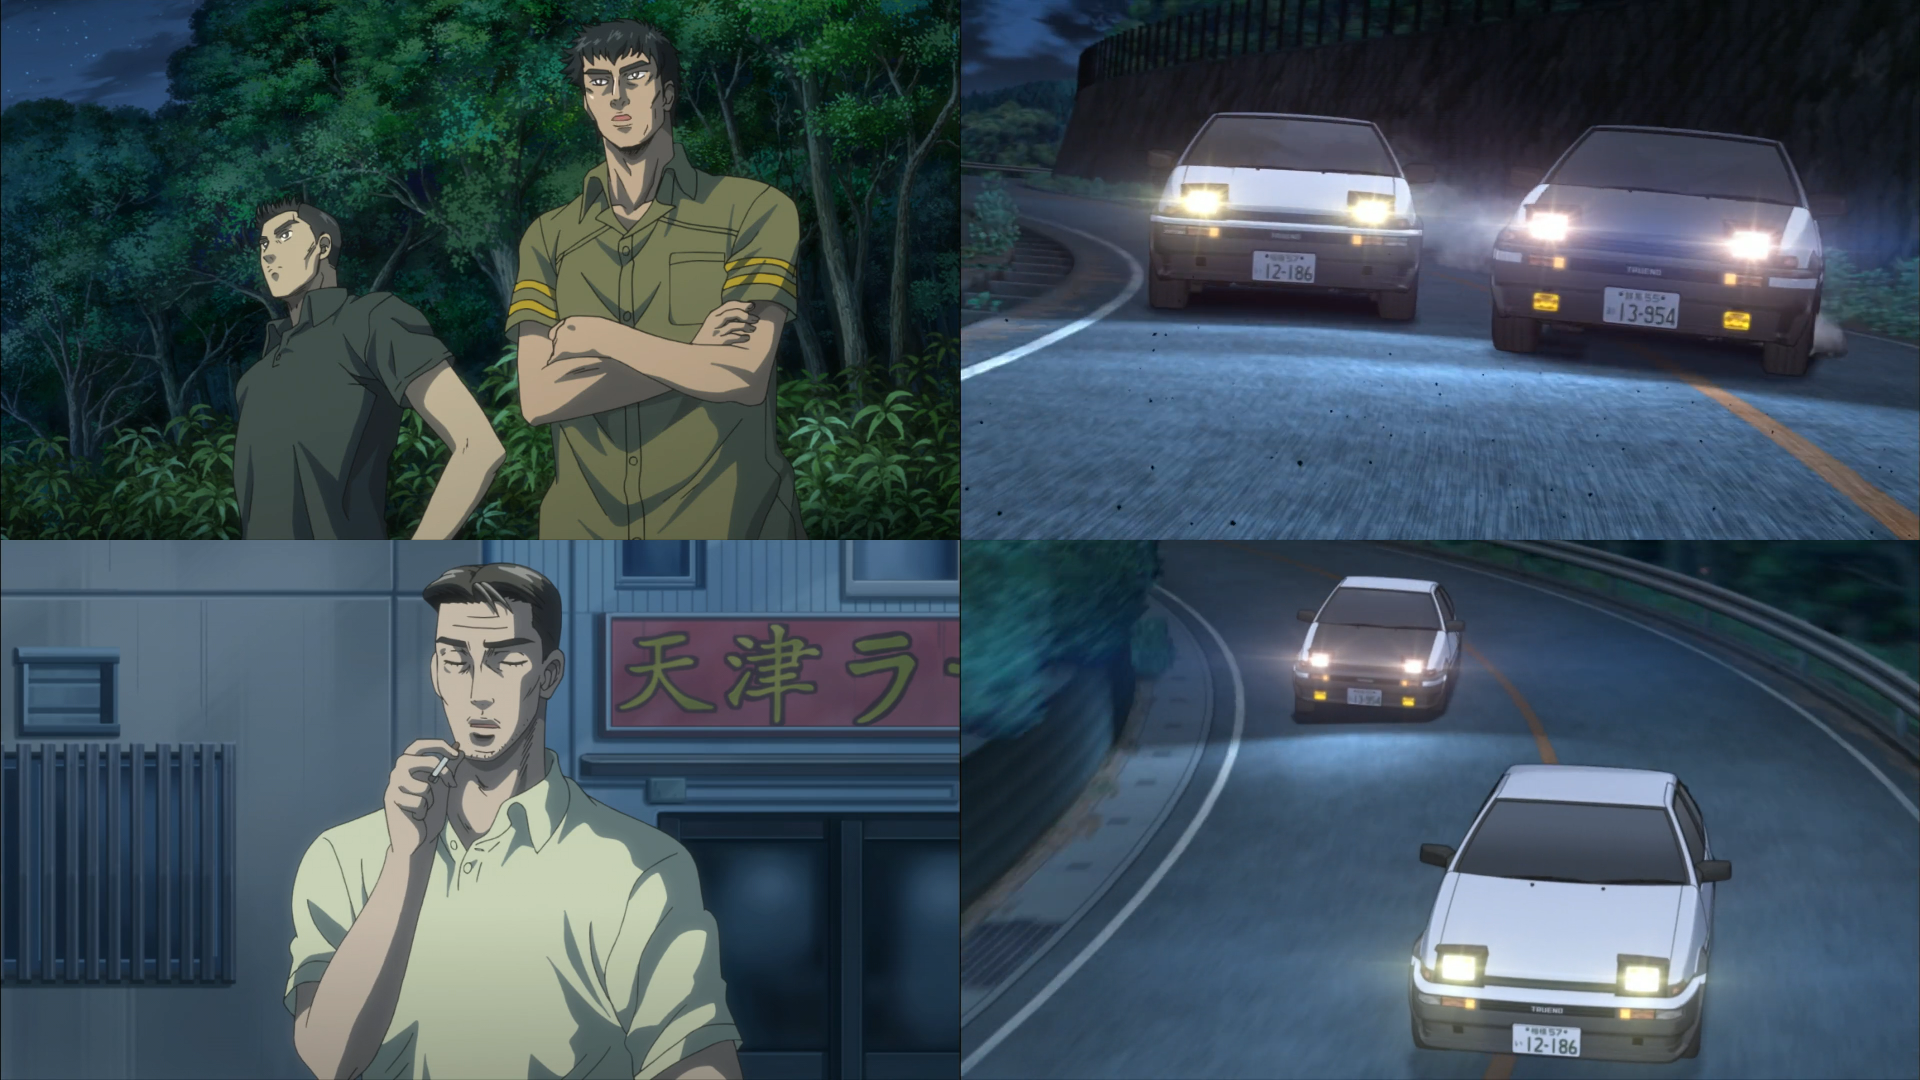 Initial D First Stage, the three main car in Initial D firs…